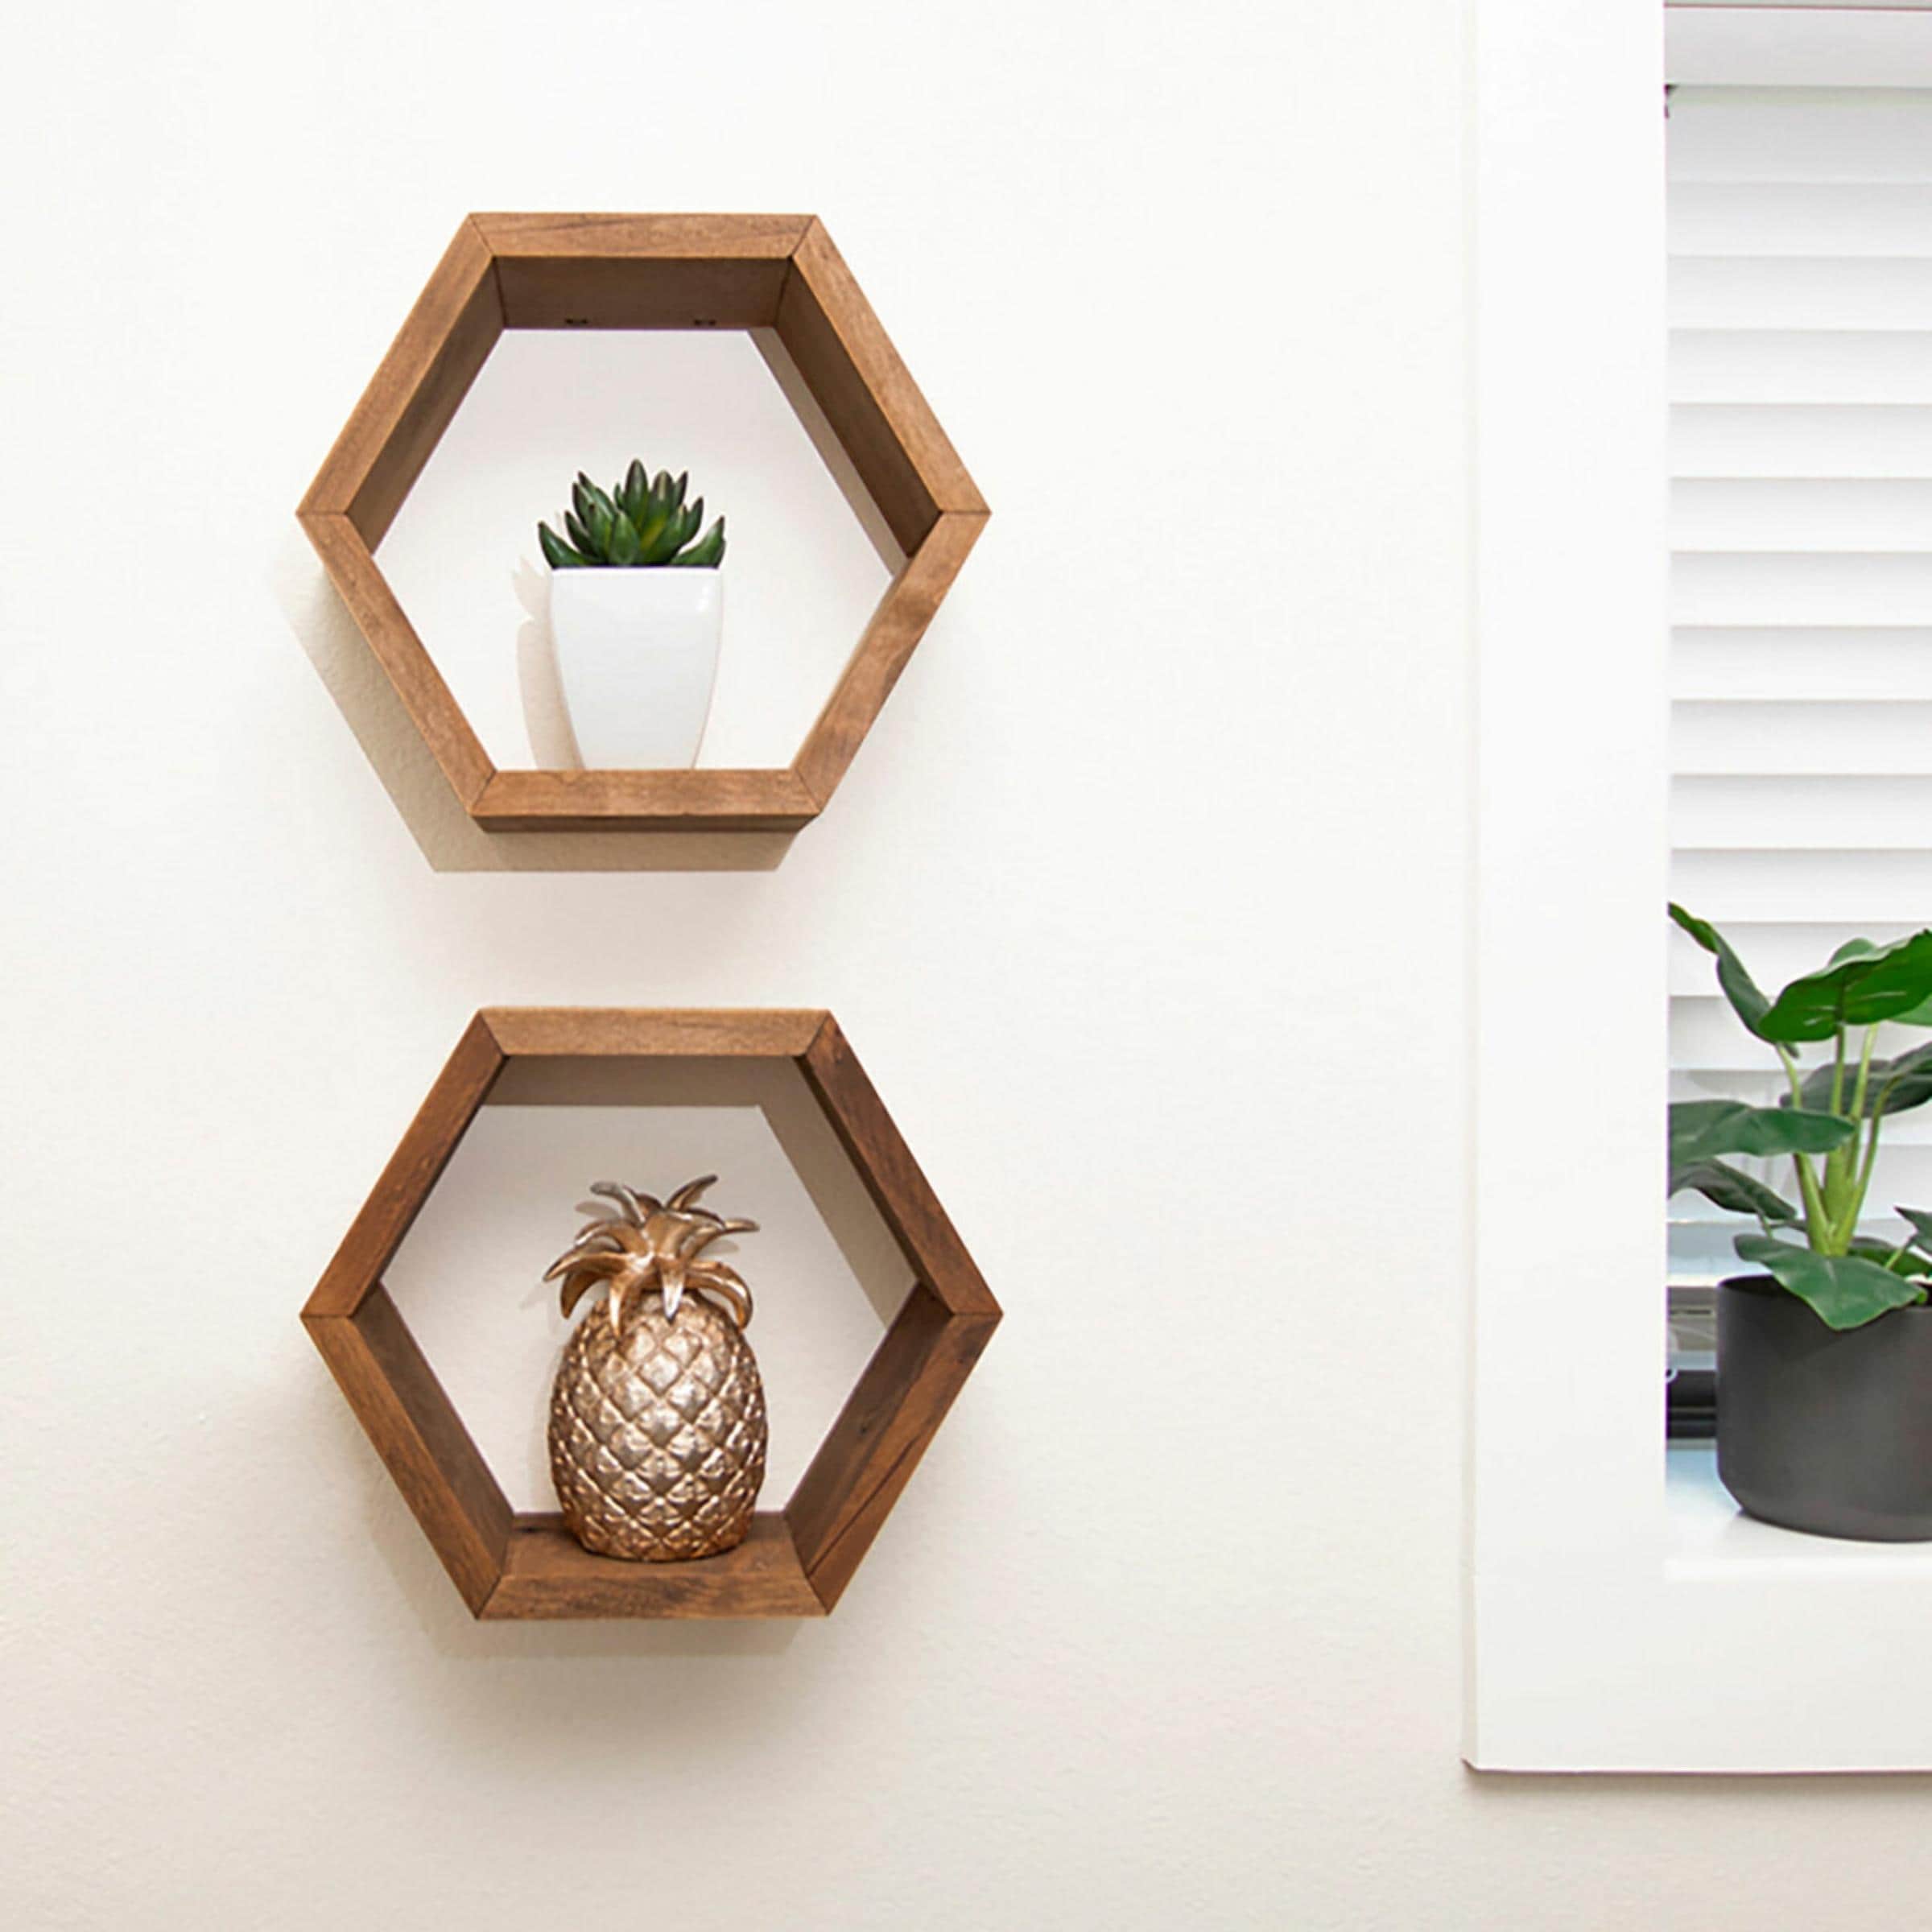 Oumilen Hexagon Floating Shelves Wall Mounted, Honeycomb Wood Shelf Storage  Farmhouse Home Decor (Set of 3) ON-Hex-Wall-GW - The Home Depot